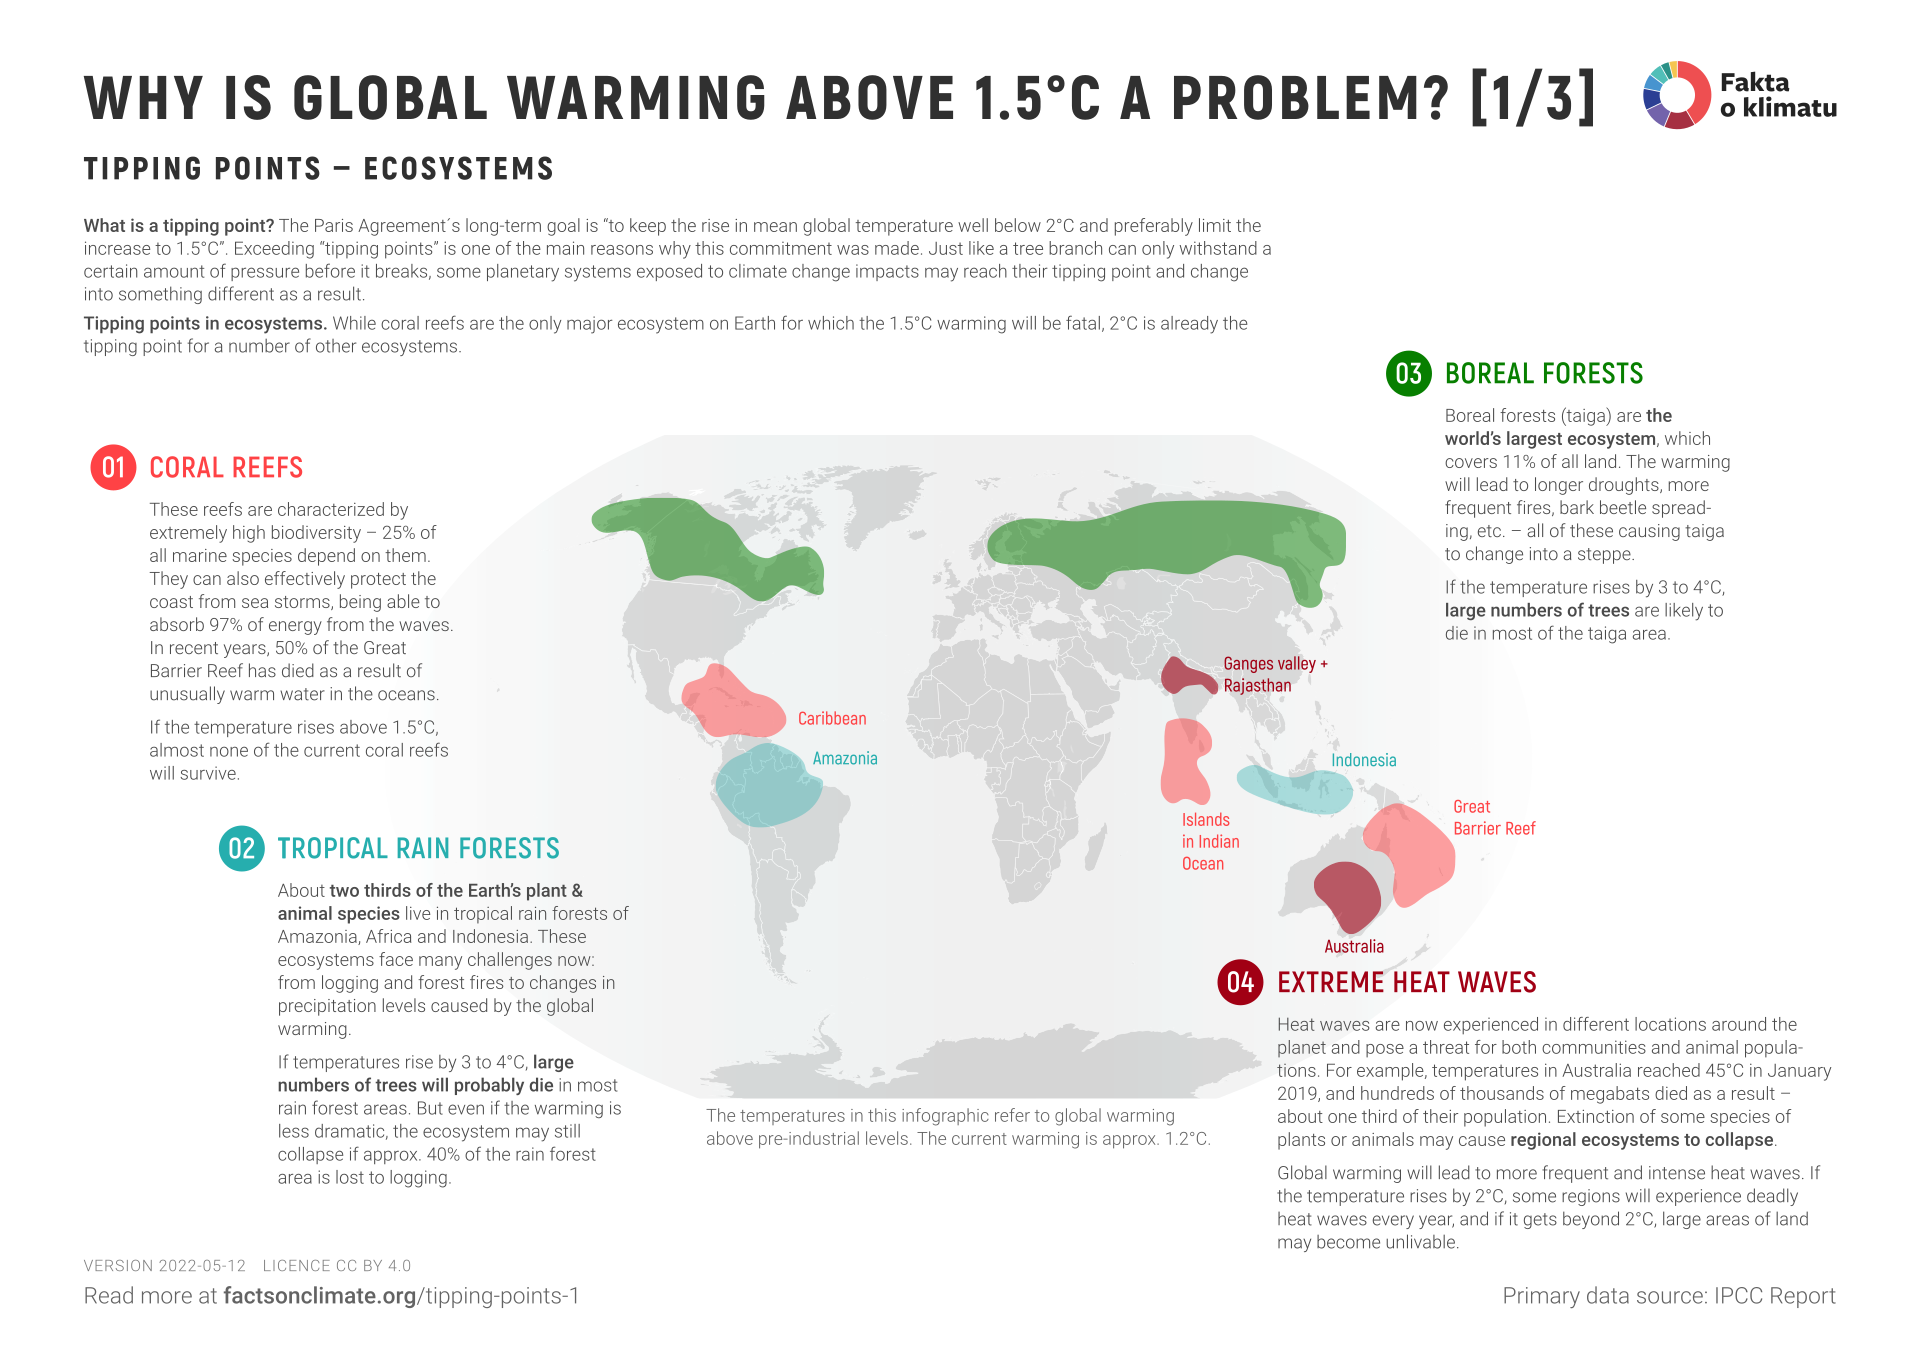 Why is global warming above 1.5 °C a problem? [1/3]